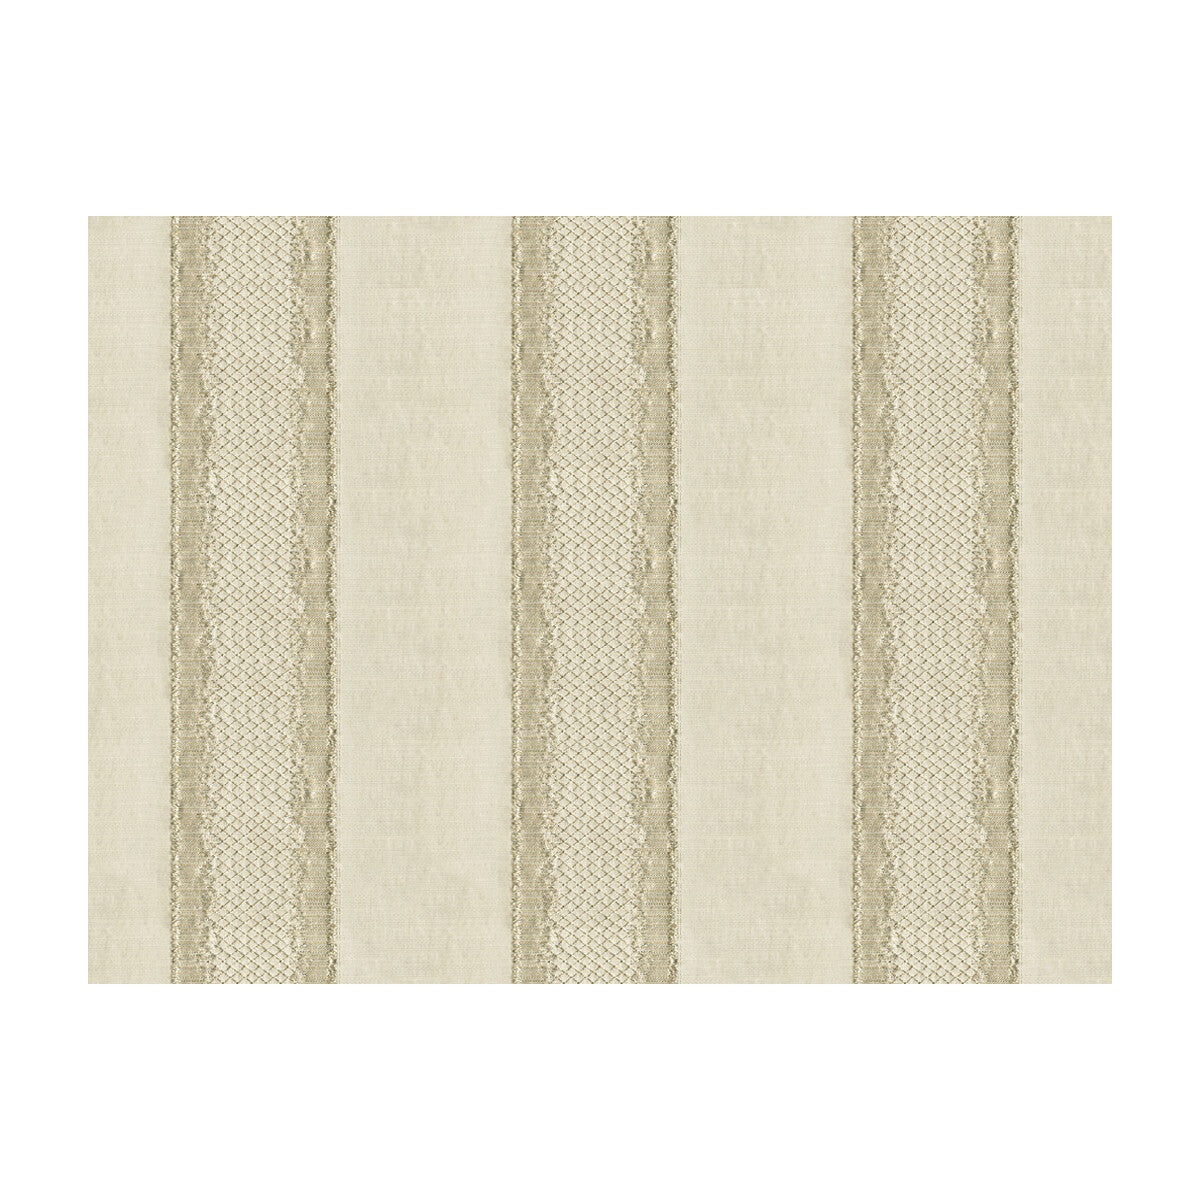 Gilded Stripe fabric in champagne color - pattern 33279.1.0 - by Kravet Couture in the Modern Luxe collection